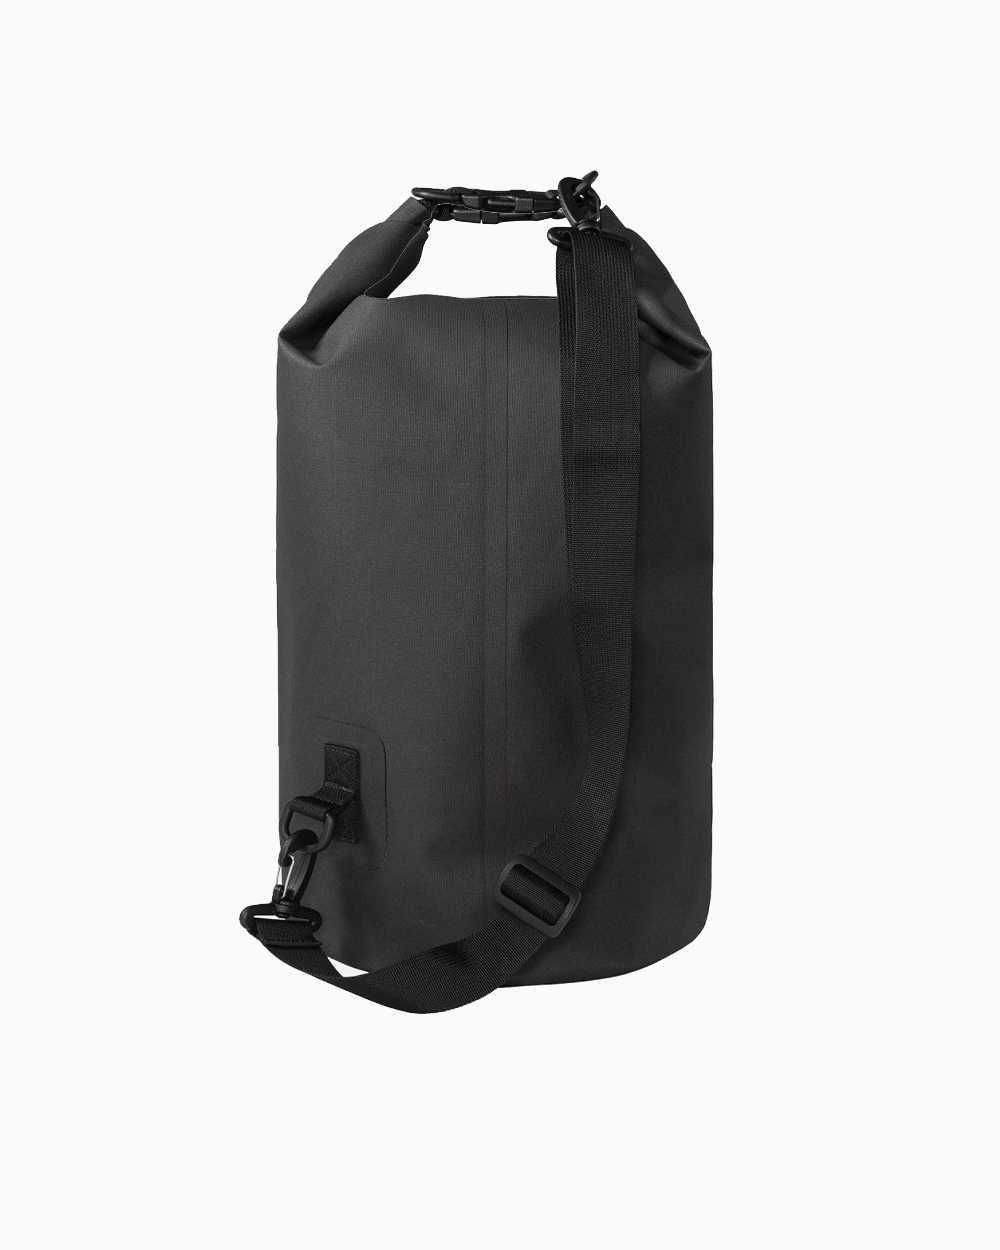 Carhartt Wip: Сумка водонепроницаемая Carhartt WIP Soundscapes Dry Bag